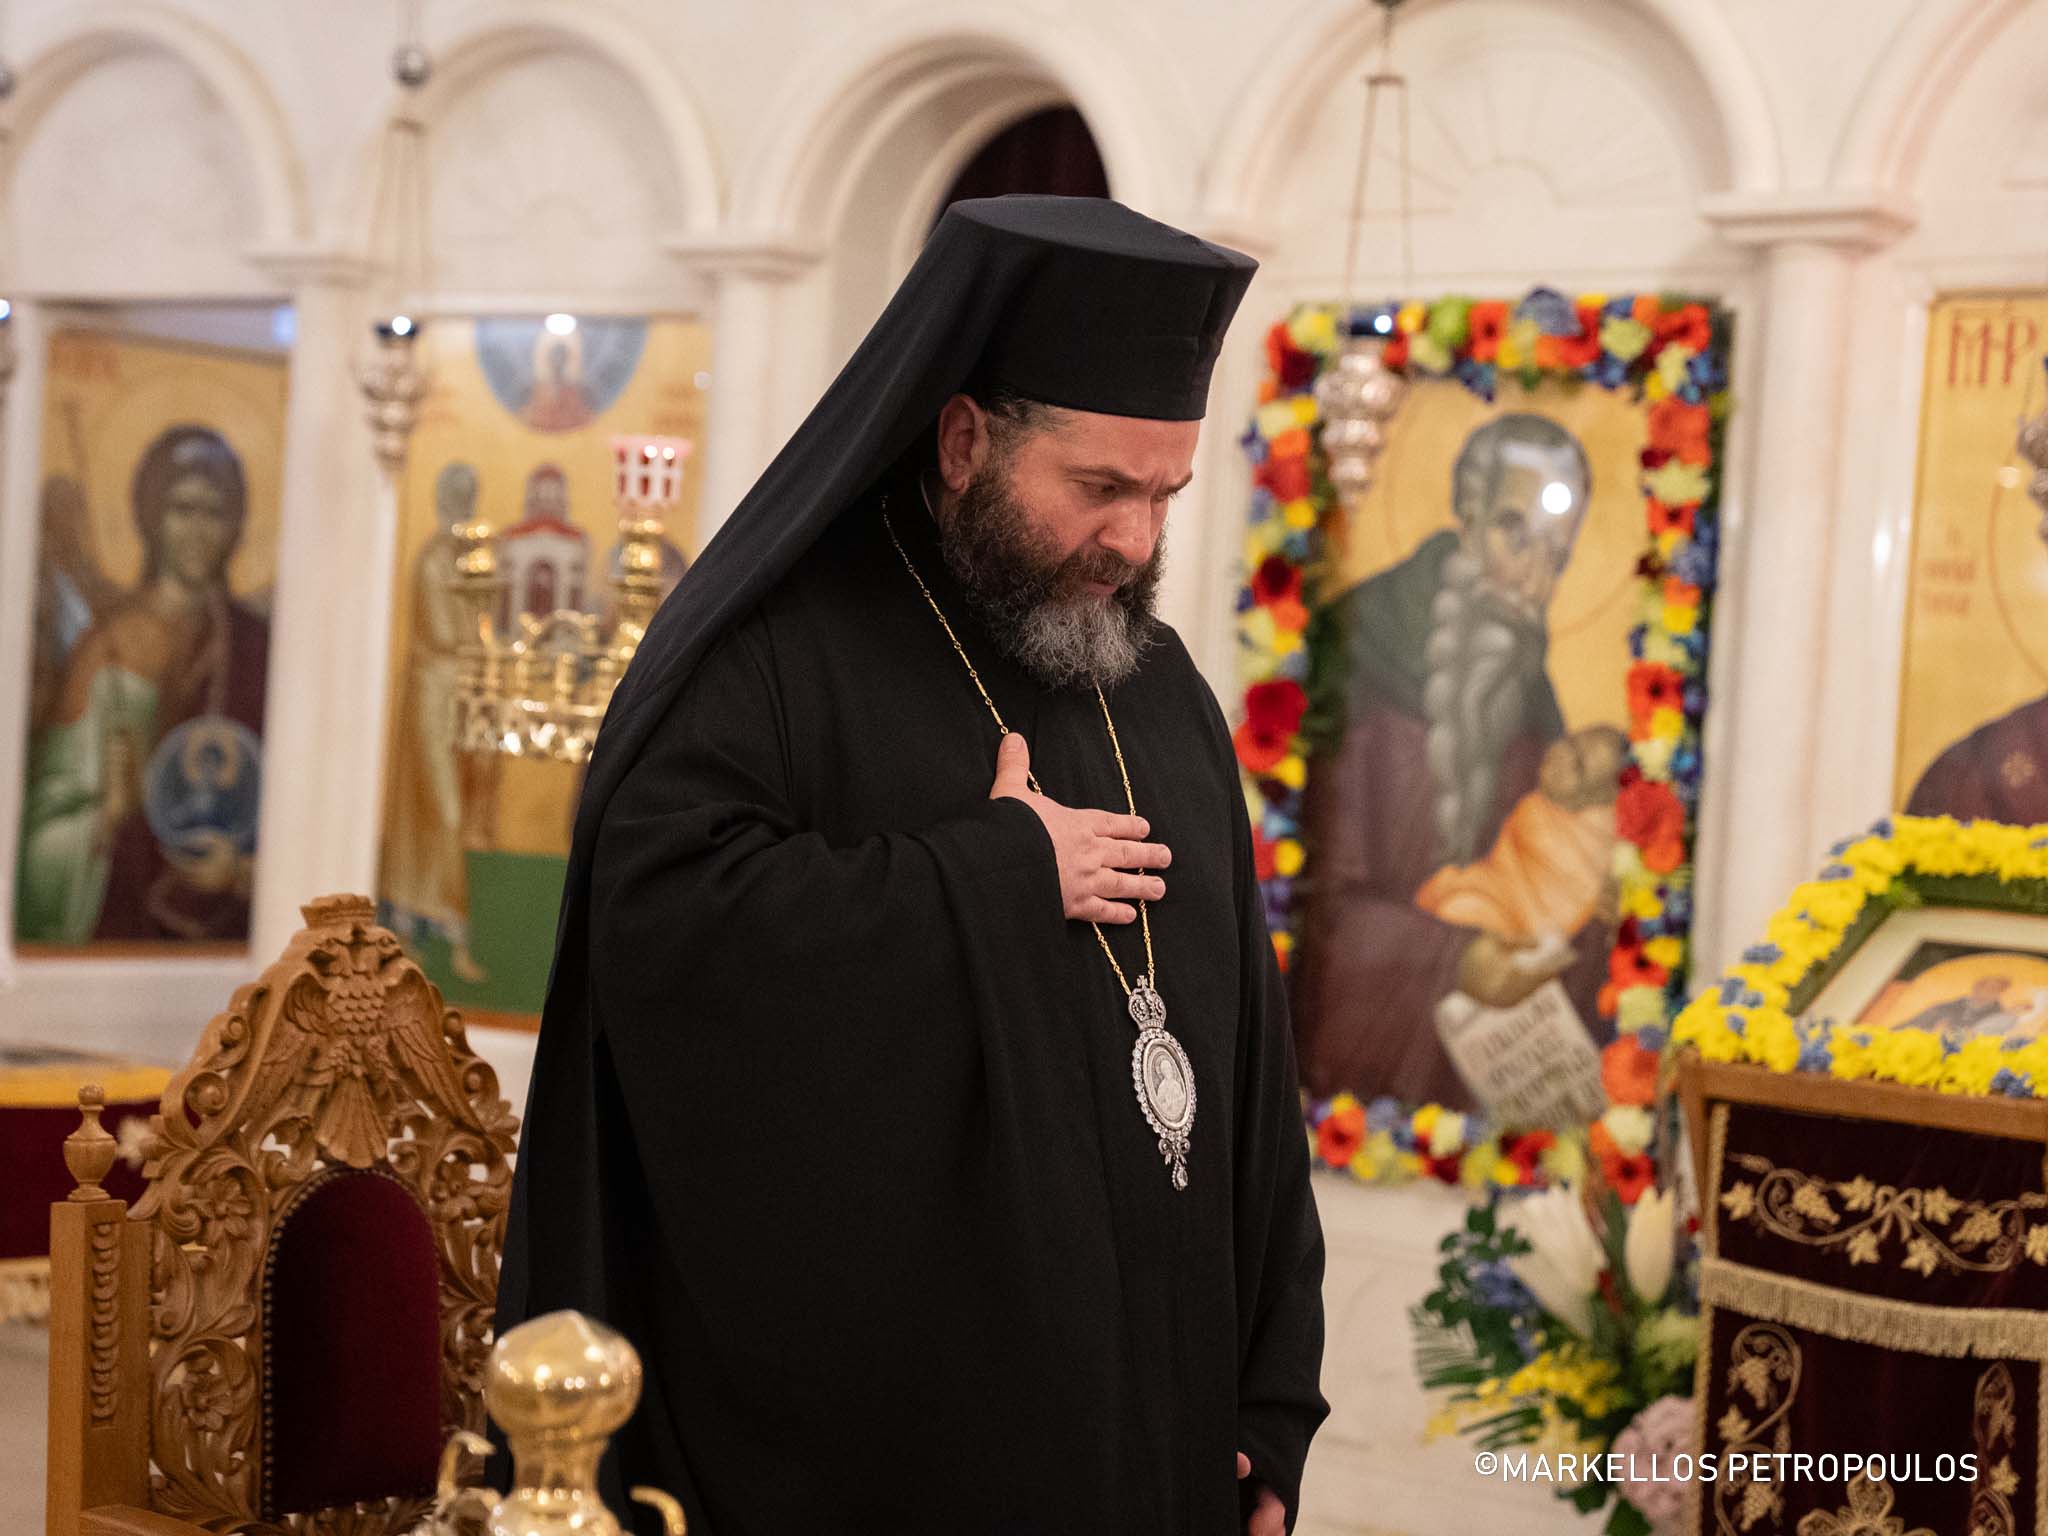 Archbishop Makarios of Australia officiated at the Vespers at Saint Stylianos Church in Sydney